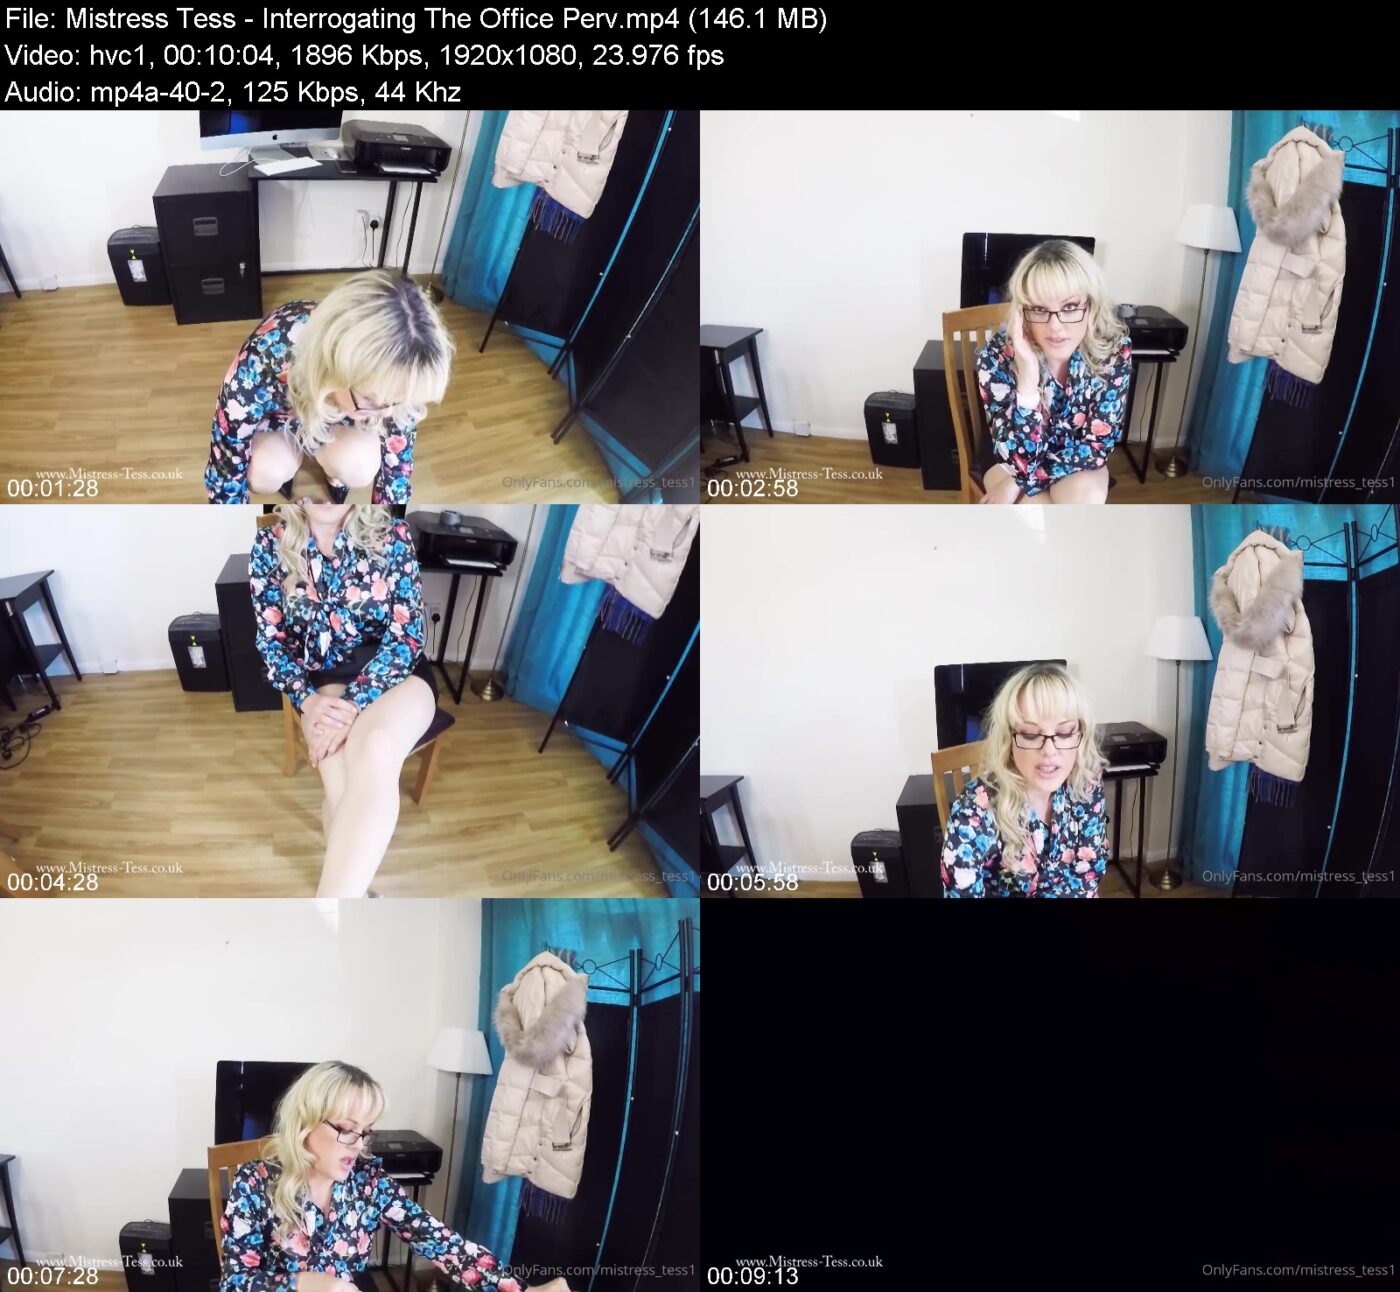 Actress: Mistress Tess. Title and Studio: Interrogating The Office Perv